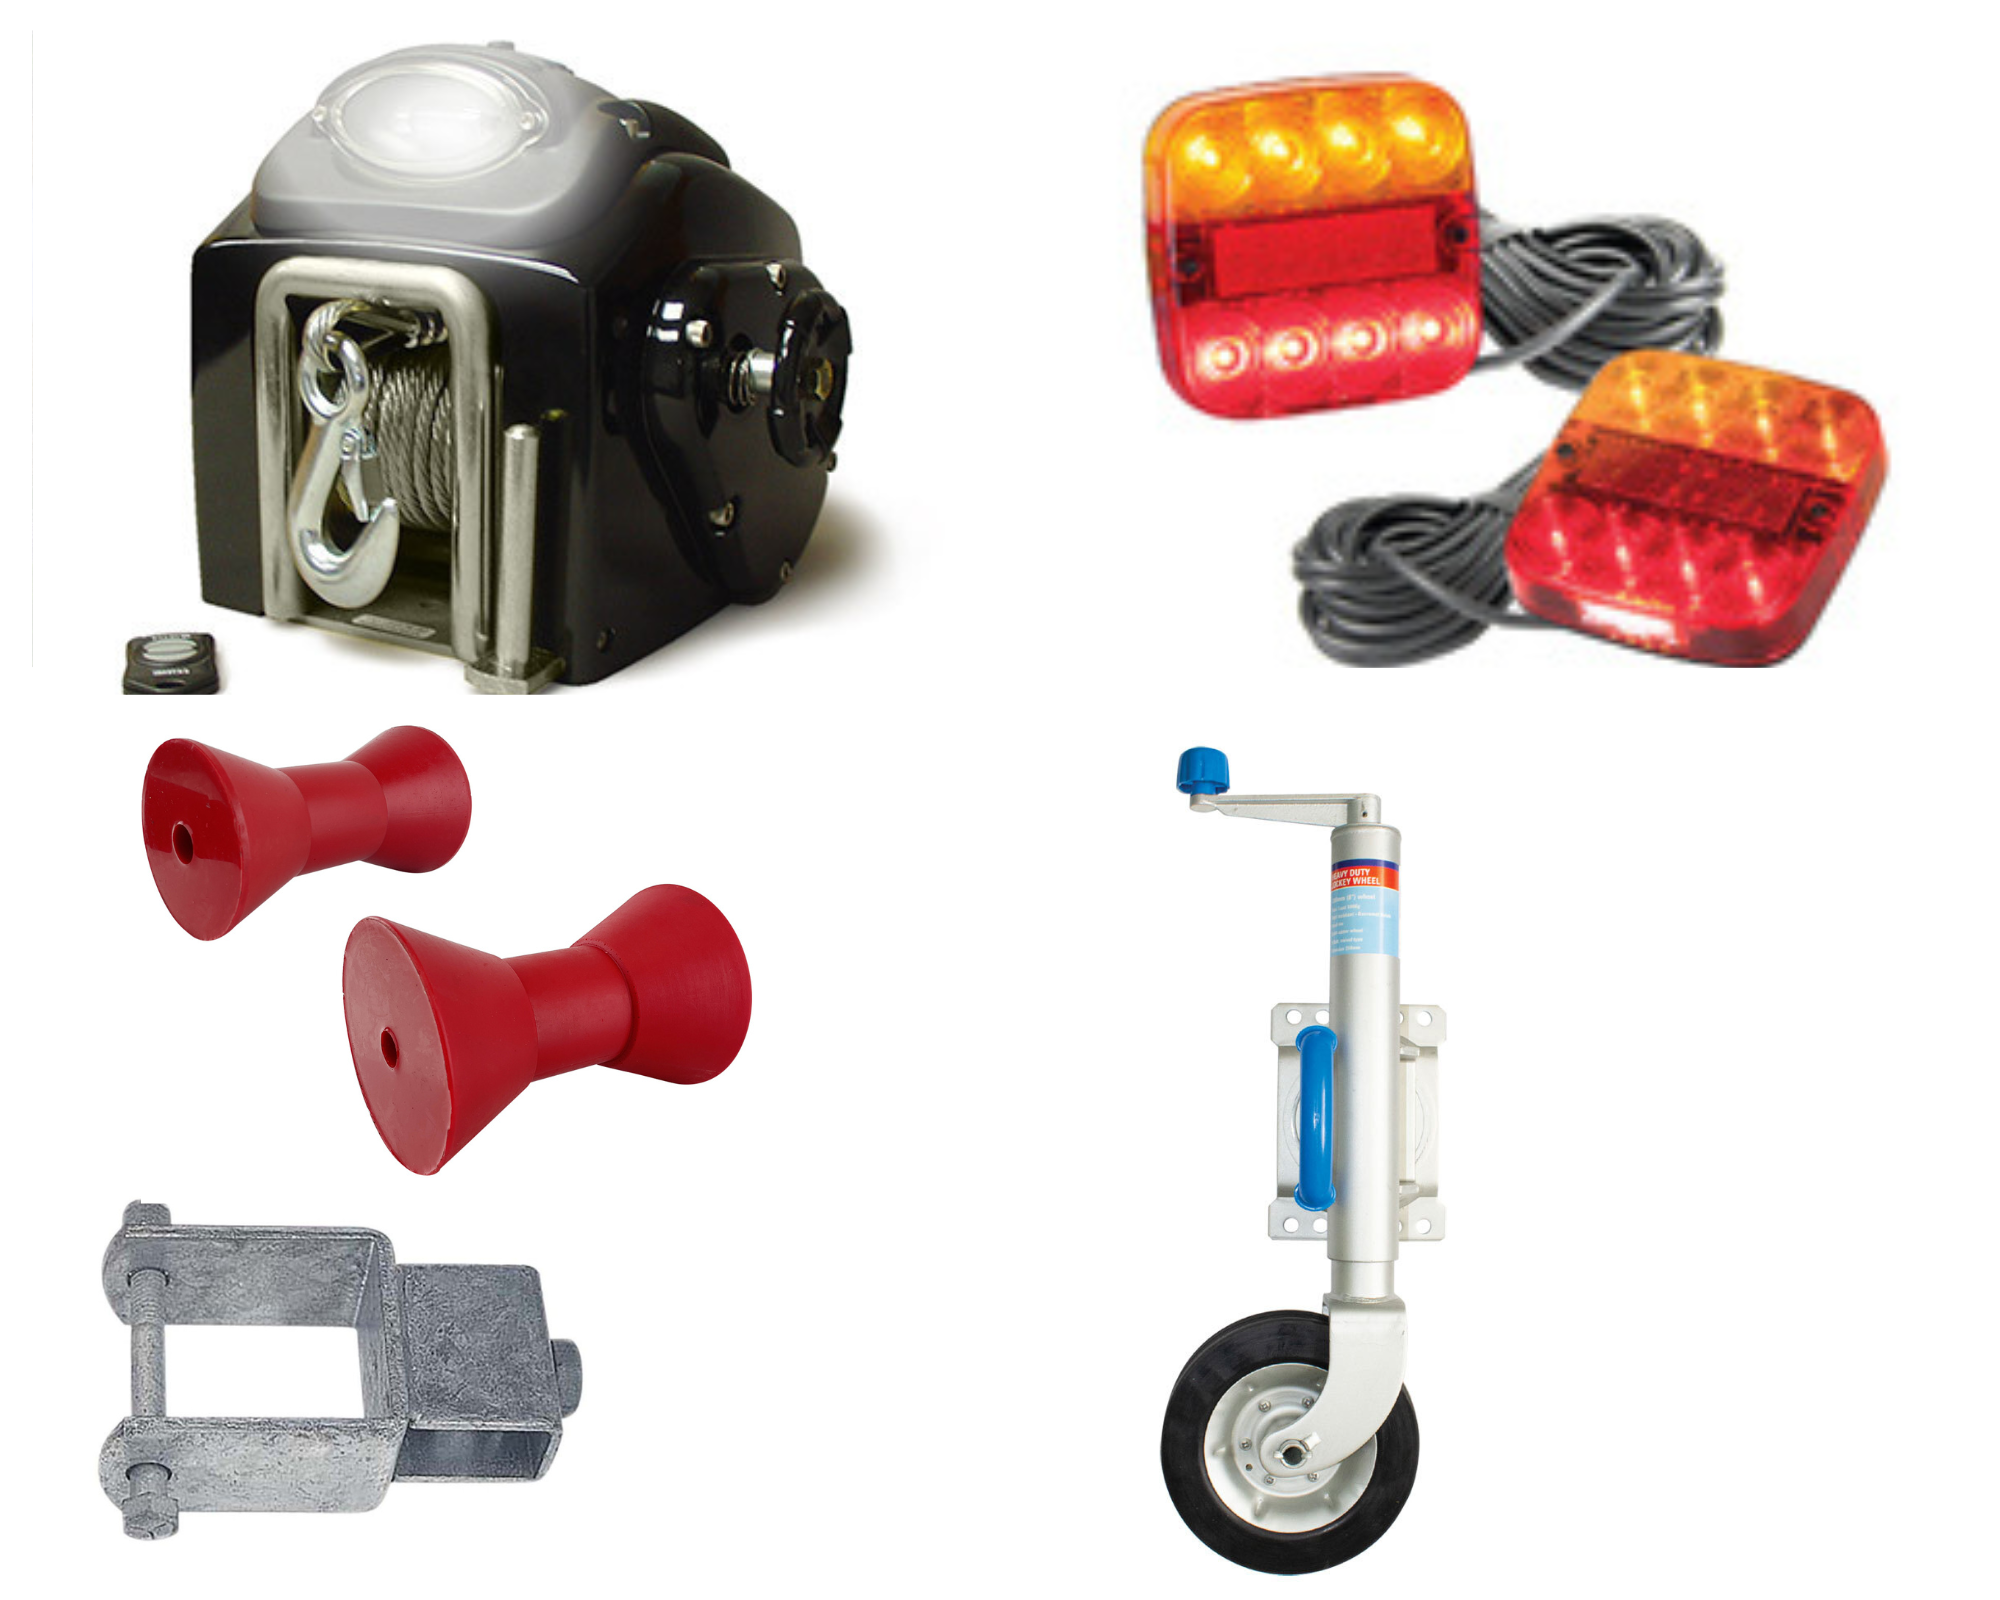 A boat trailer parts shop in Perth providing quality parts for boat trailers